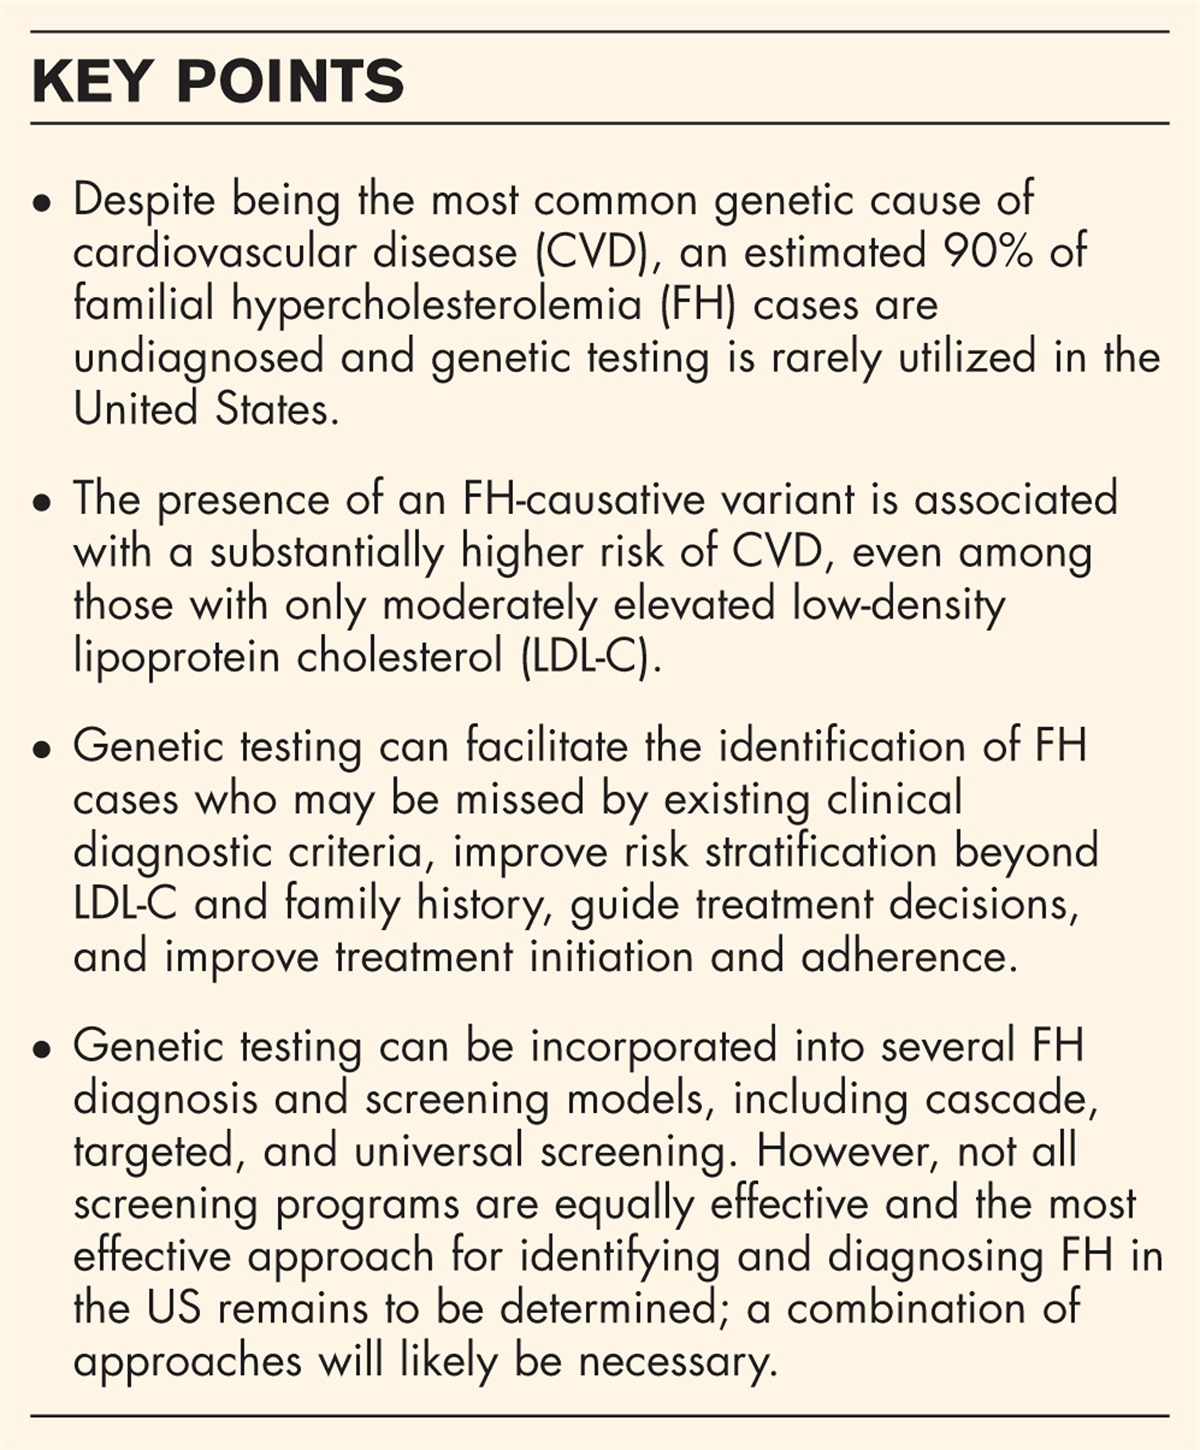 Genetic testing for familial hypercholesterolemia